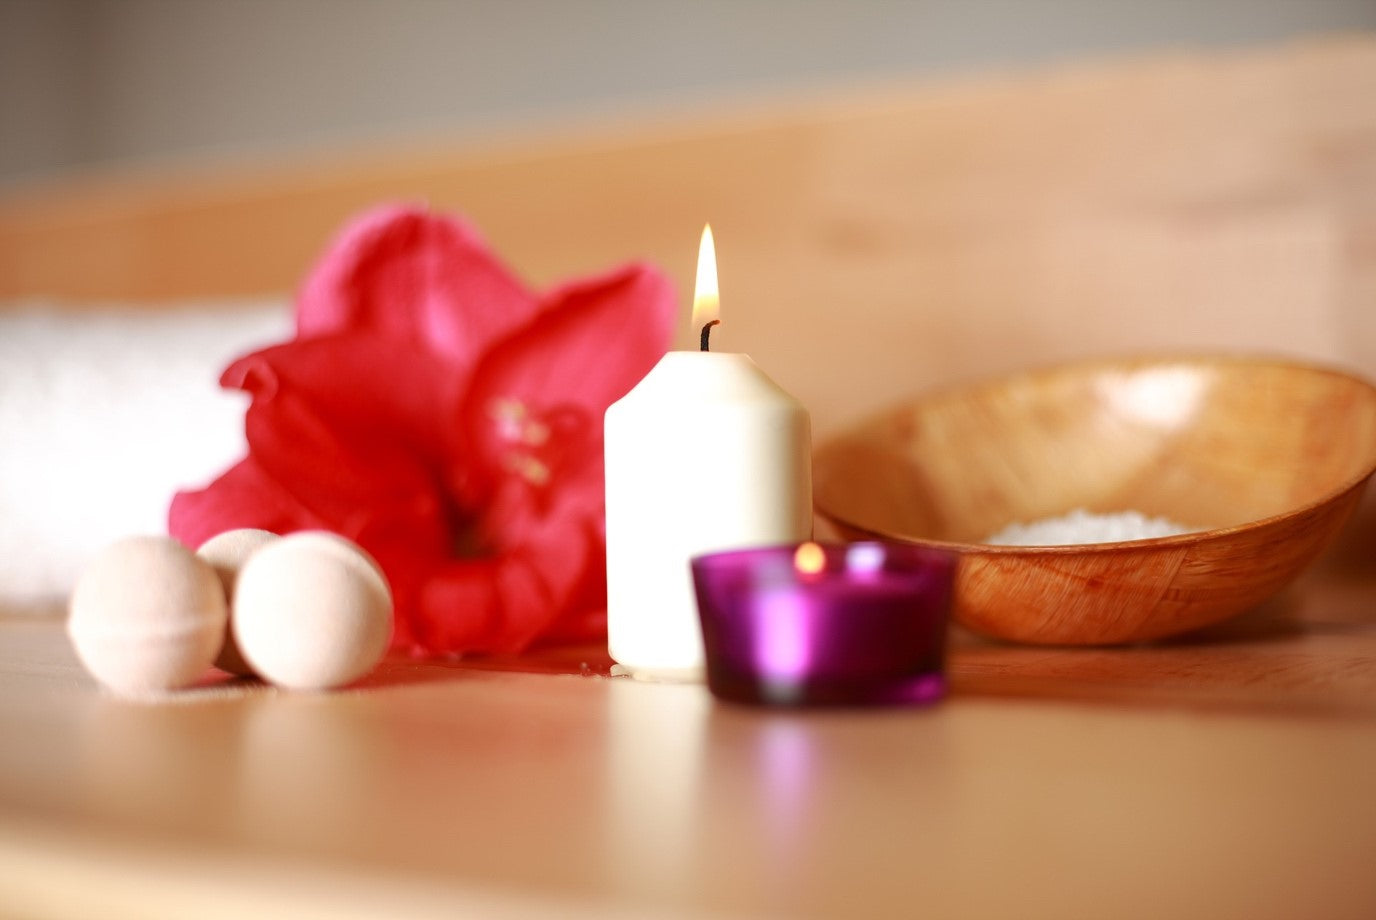 An aesthetic collection of soothing items, including scented candles, bath salts, and flowers